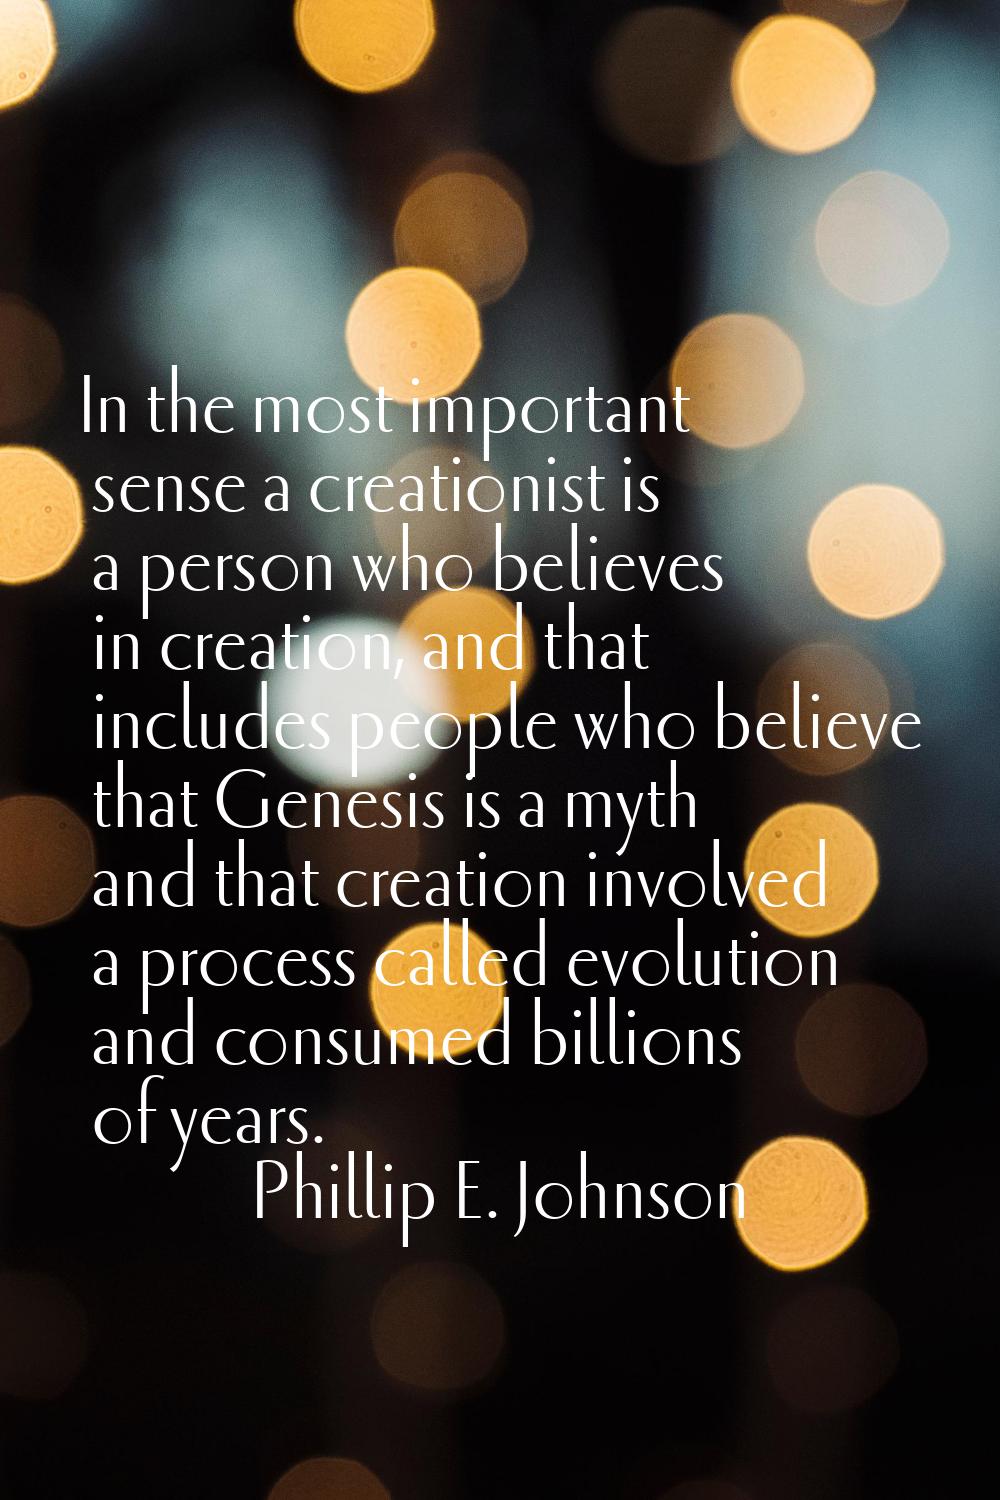 In the most important sense a creationist is a person who believes in creation, and that includes p